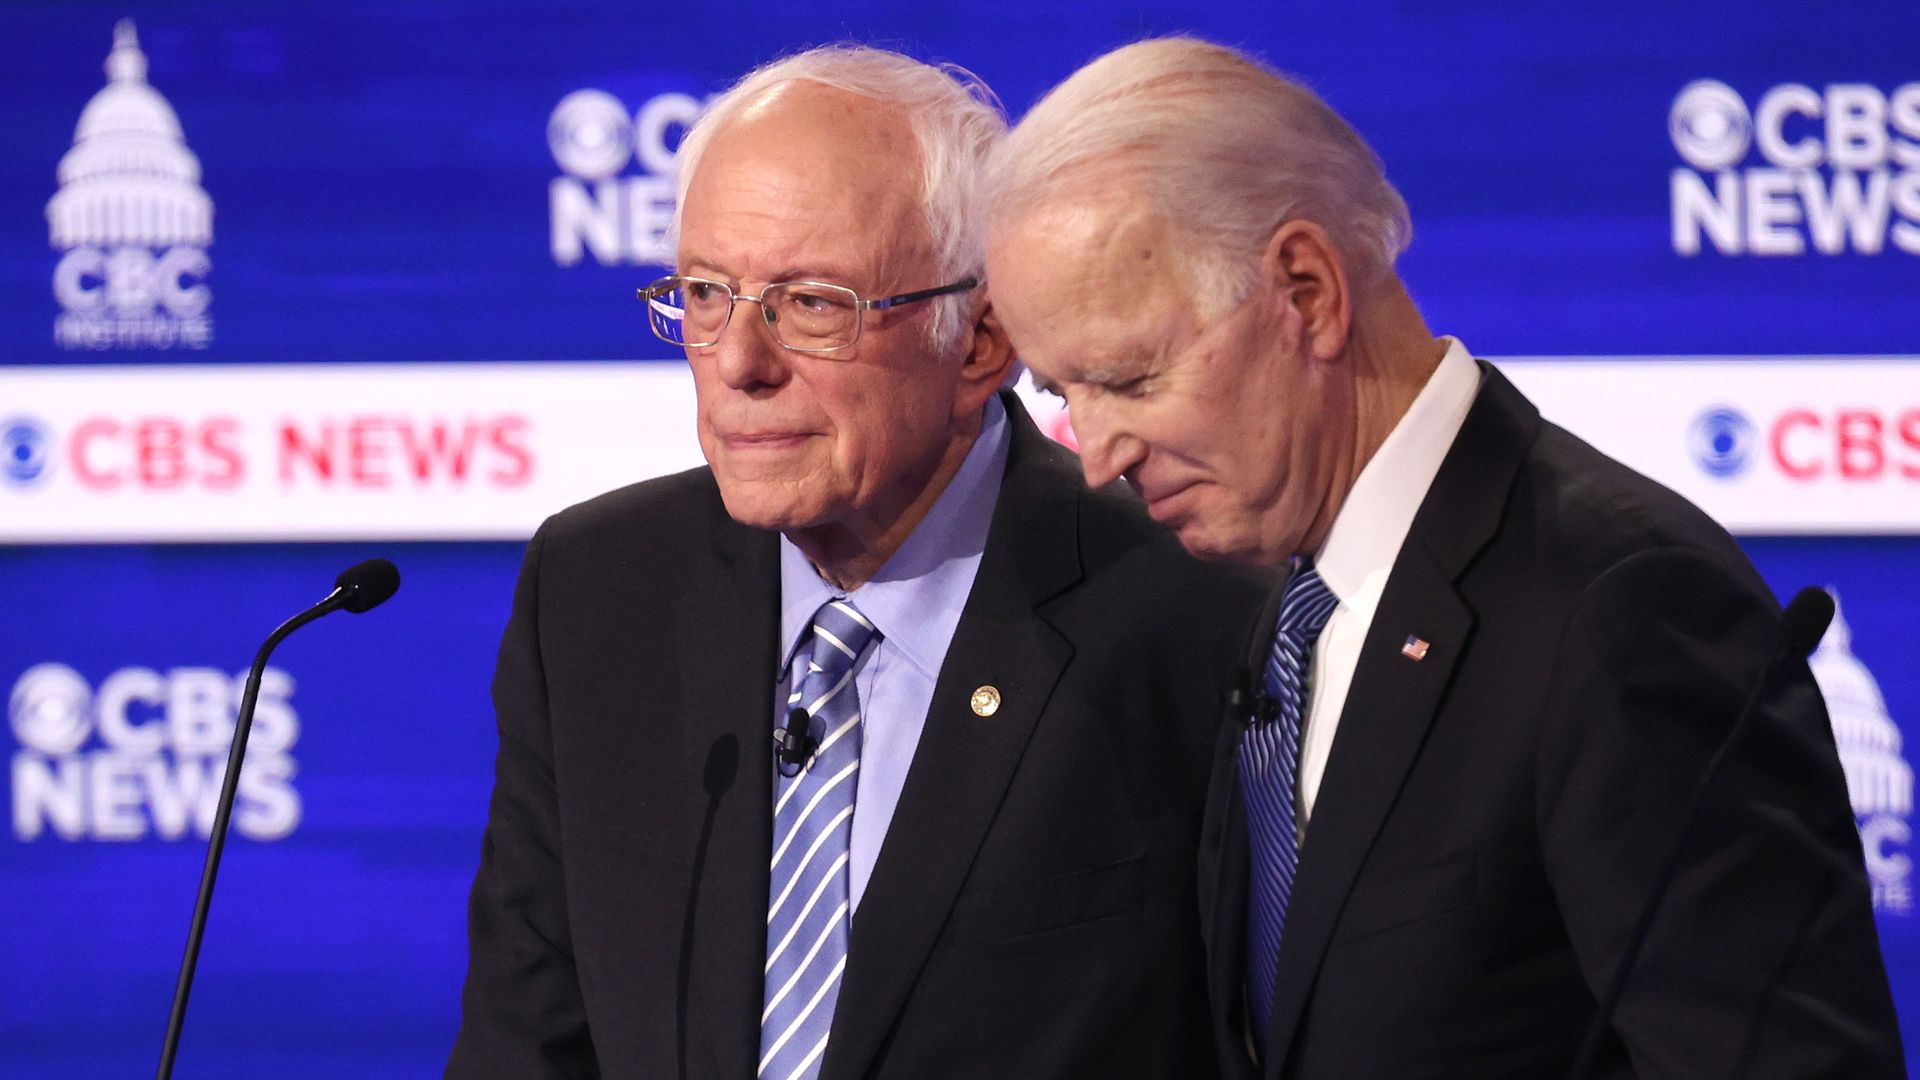 In this image, Sanders and Biden stand next to each other 